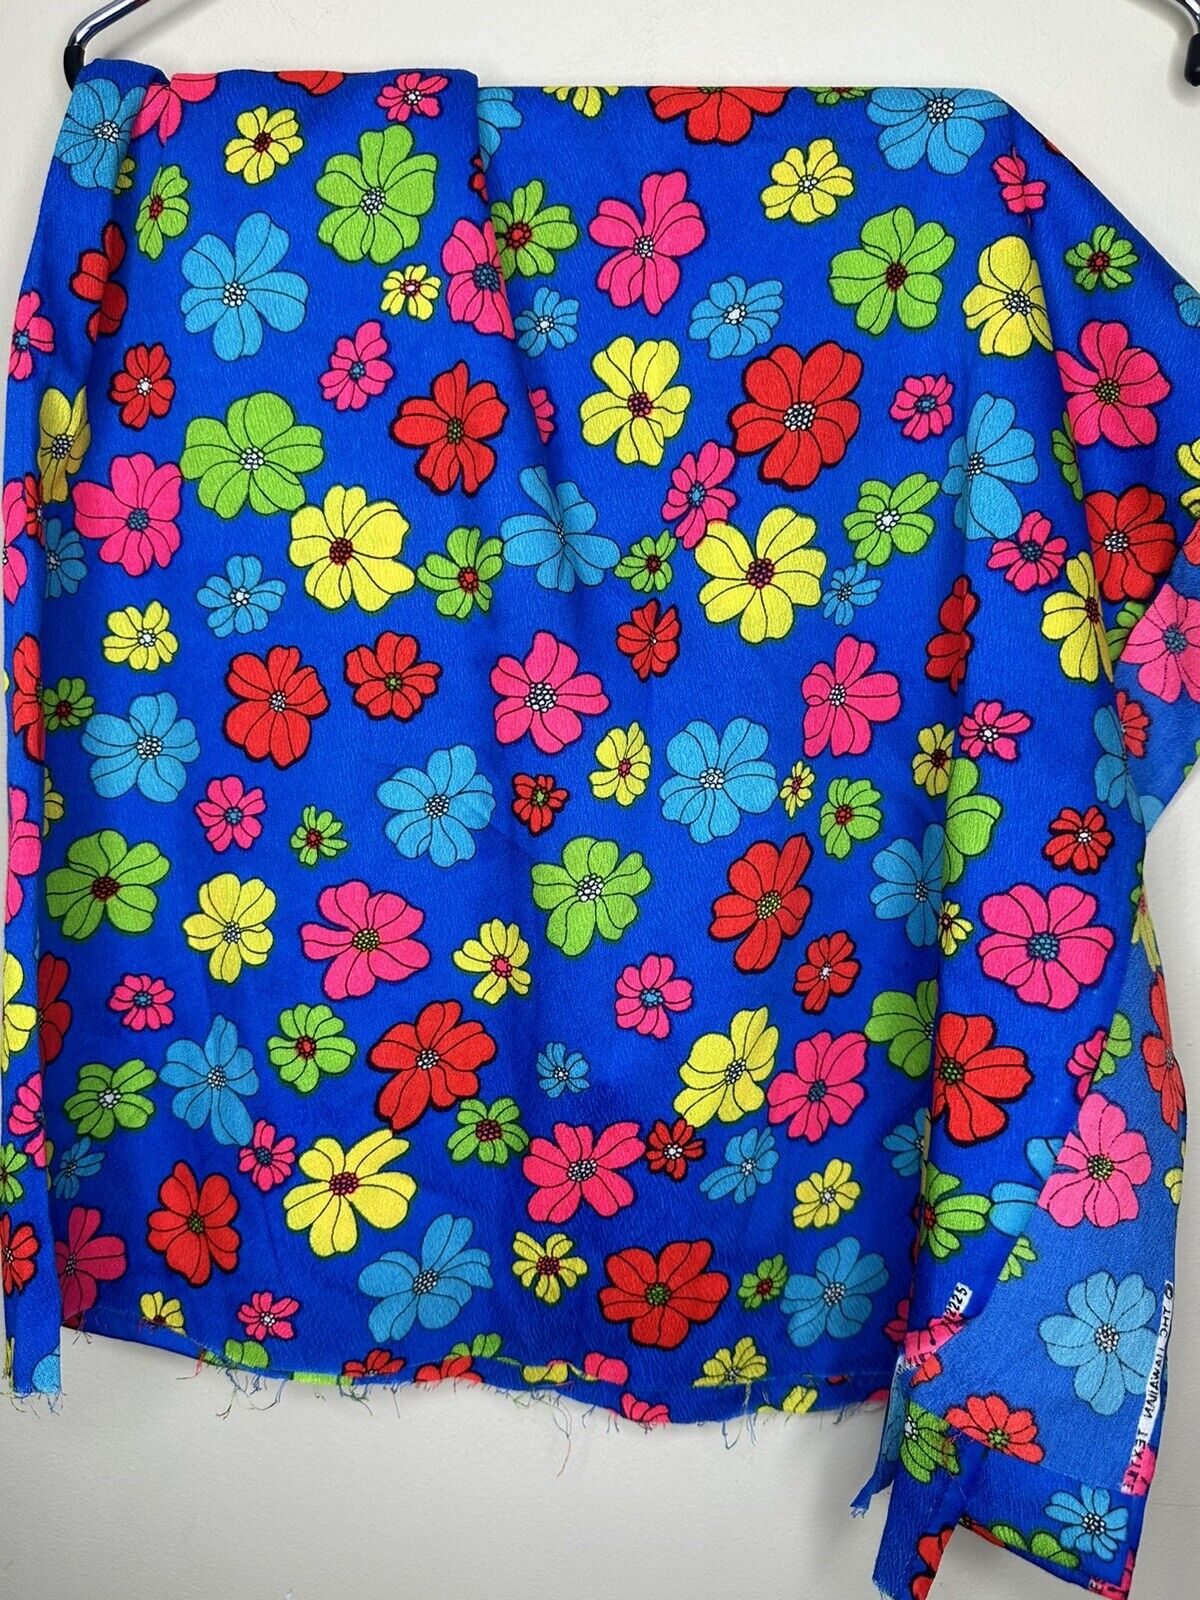 VTG THC Hawaiian Textiles Bright Floral Fabric 60s 70s Psychedelic 3 Yards Rare